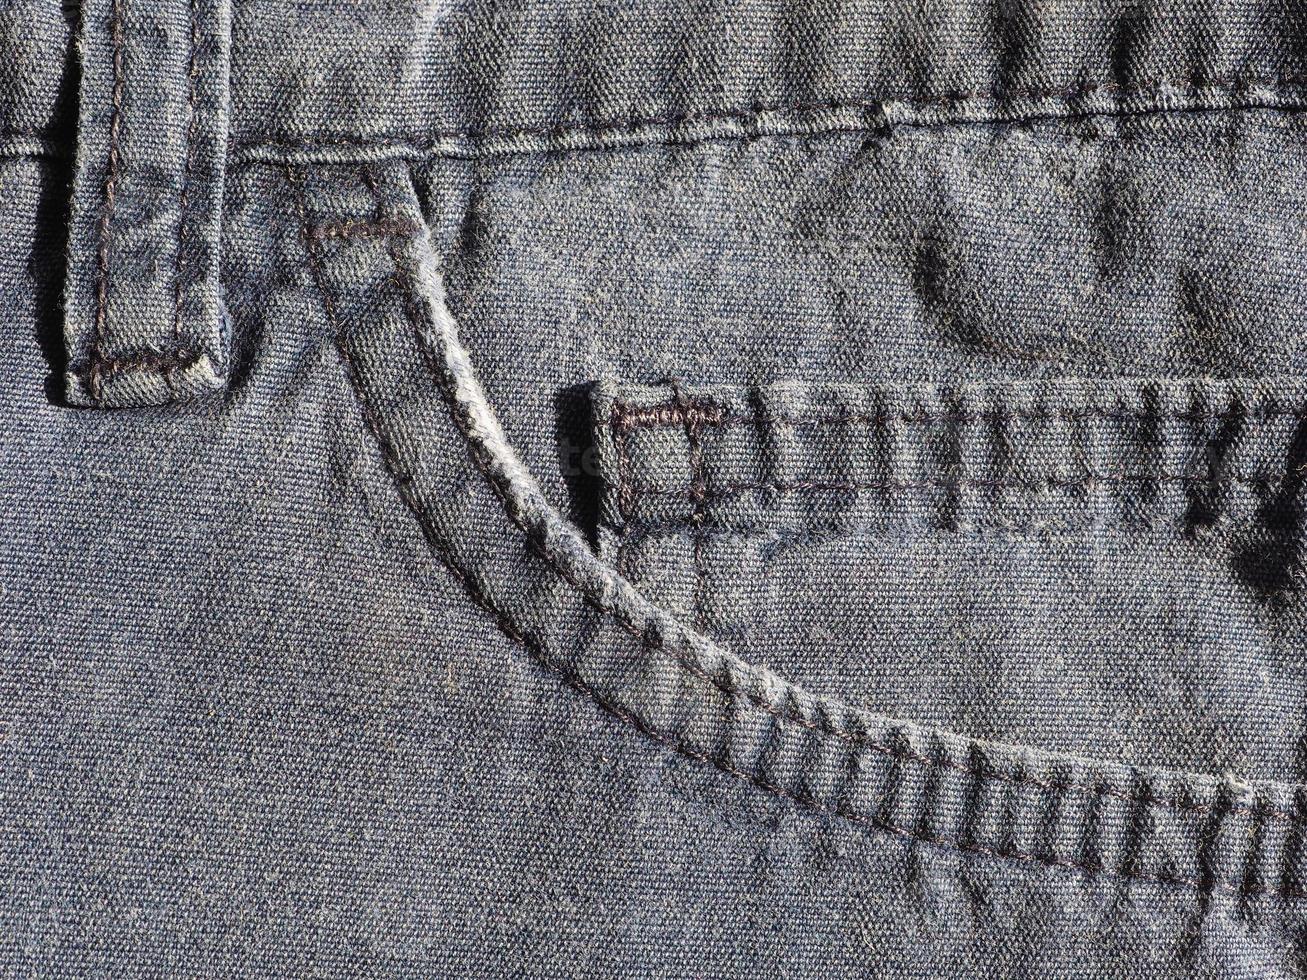 blue jeans fabric texture background photo